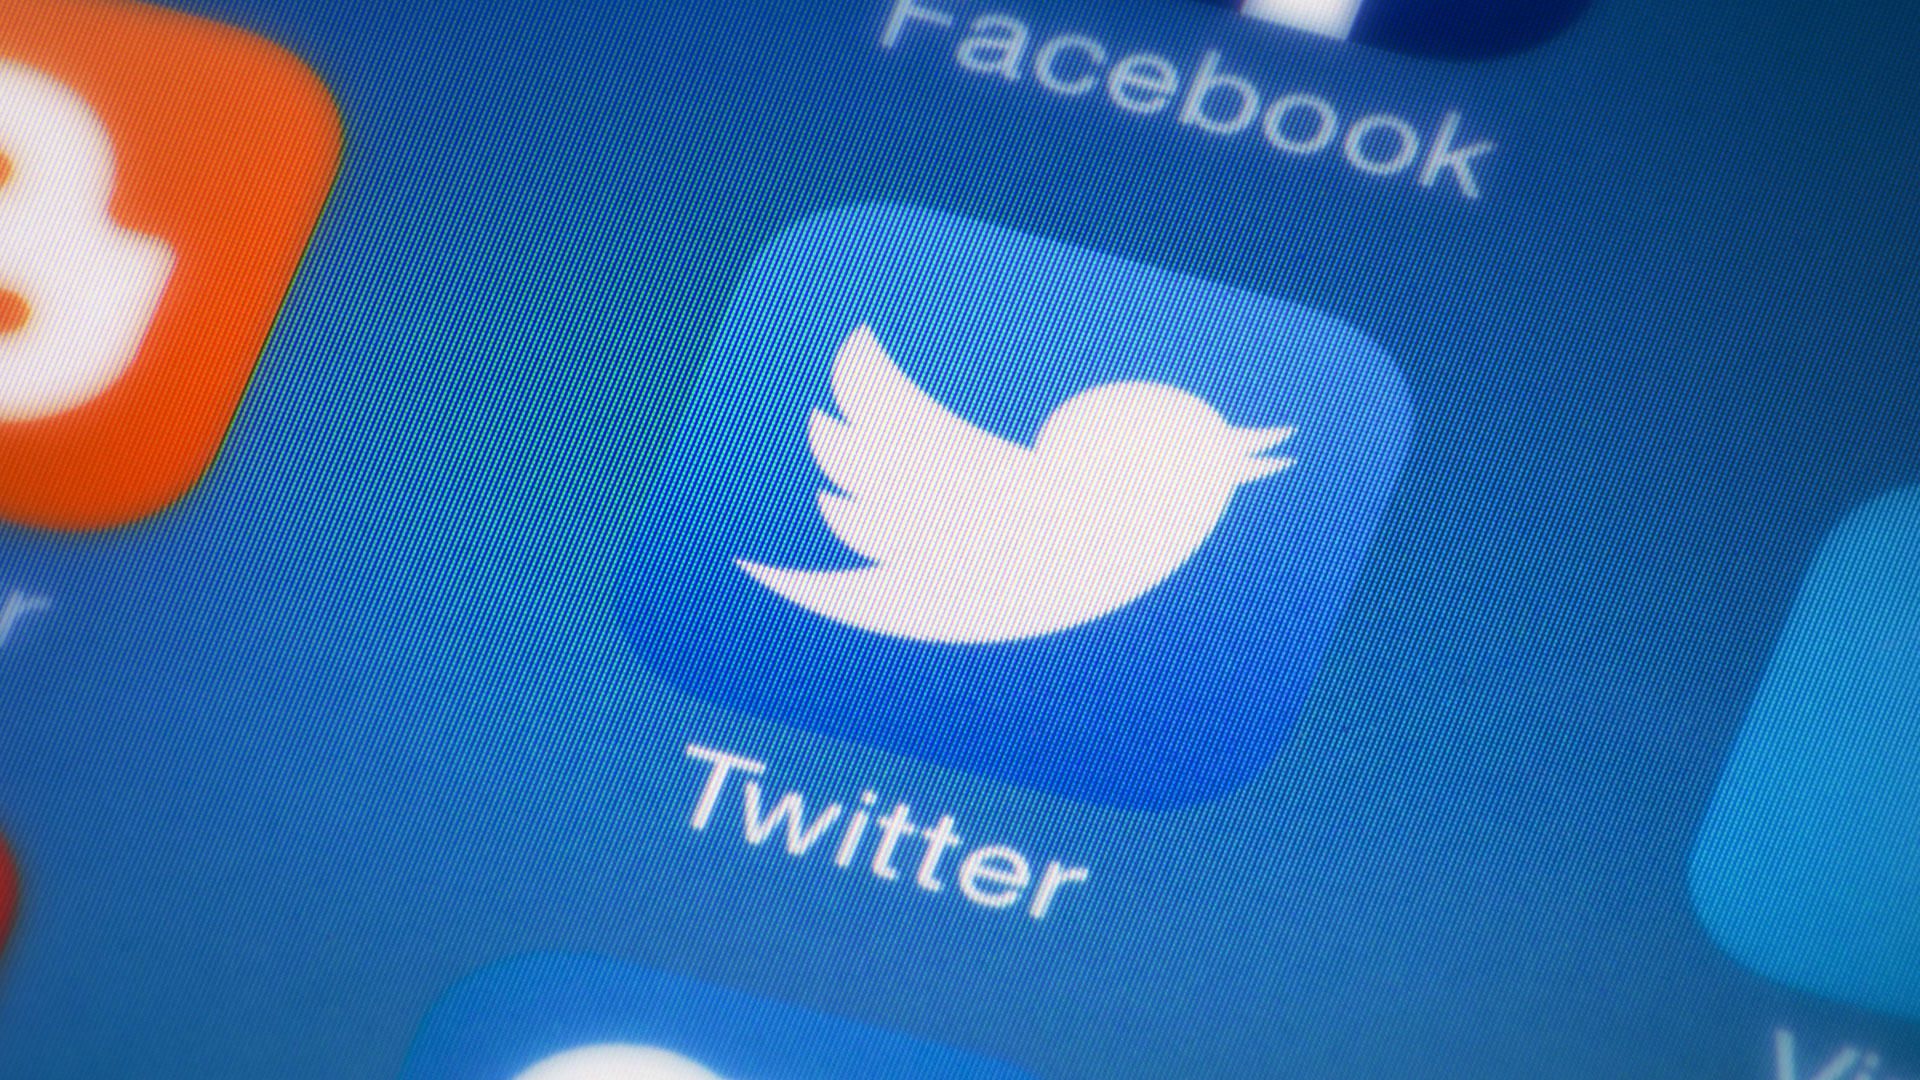 Twitter to introduce 'Official' label for some verified accounts